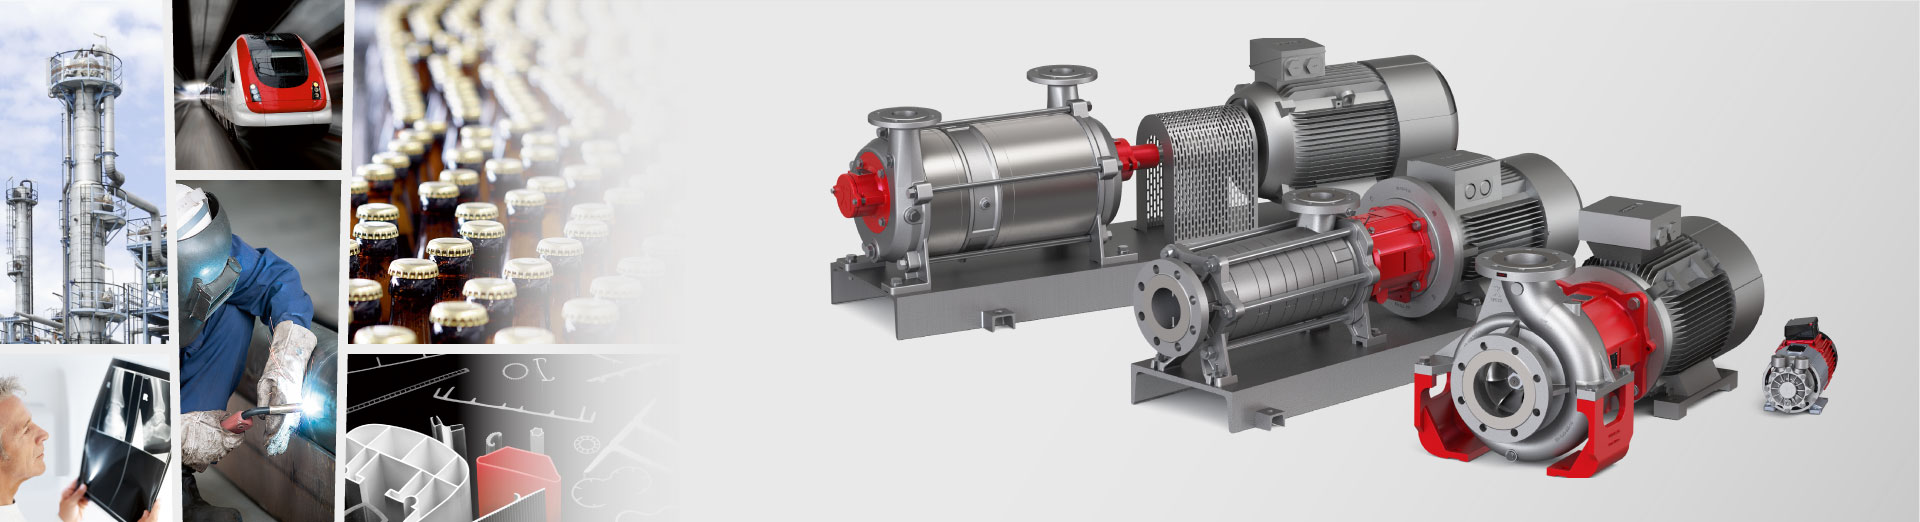 High-quality 
pumps and 
compressors
for industry